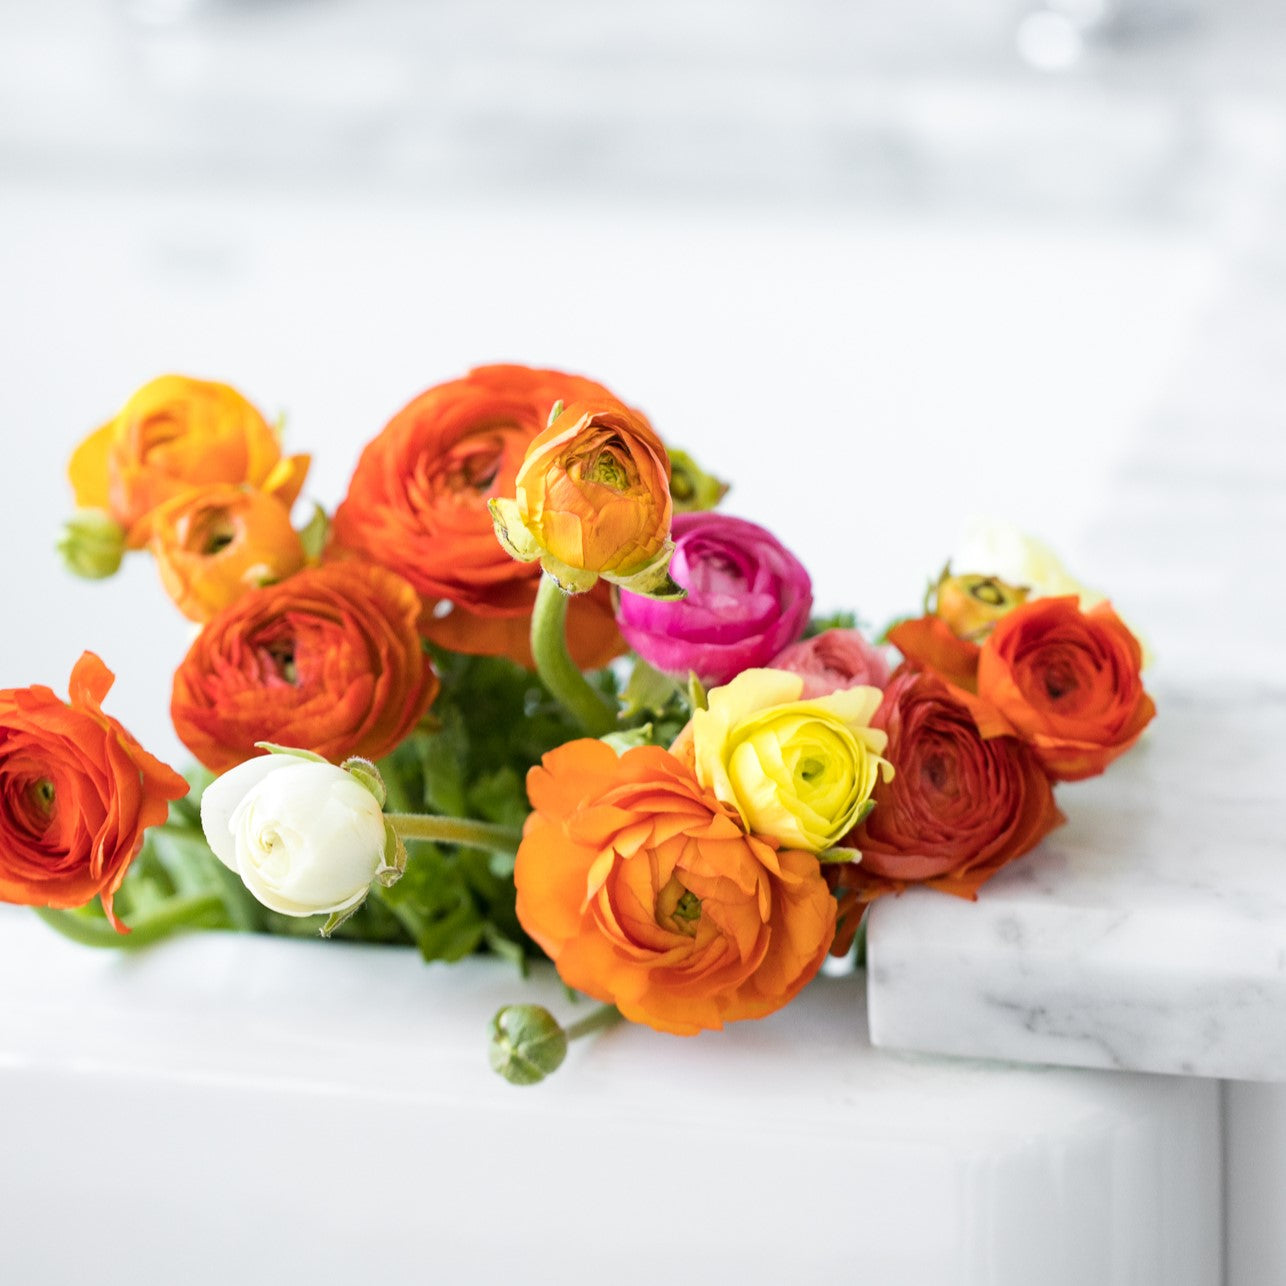 A vibrant arrangement of freshly bloomed ranunculus flowers in a marble vase, featuring a spectrum of spring colors from vivid oranges to delicate yellows and bold pinks, elegantly placed on a white surface, evoking the rejuvenating spirit of spring.